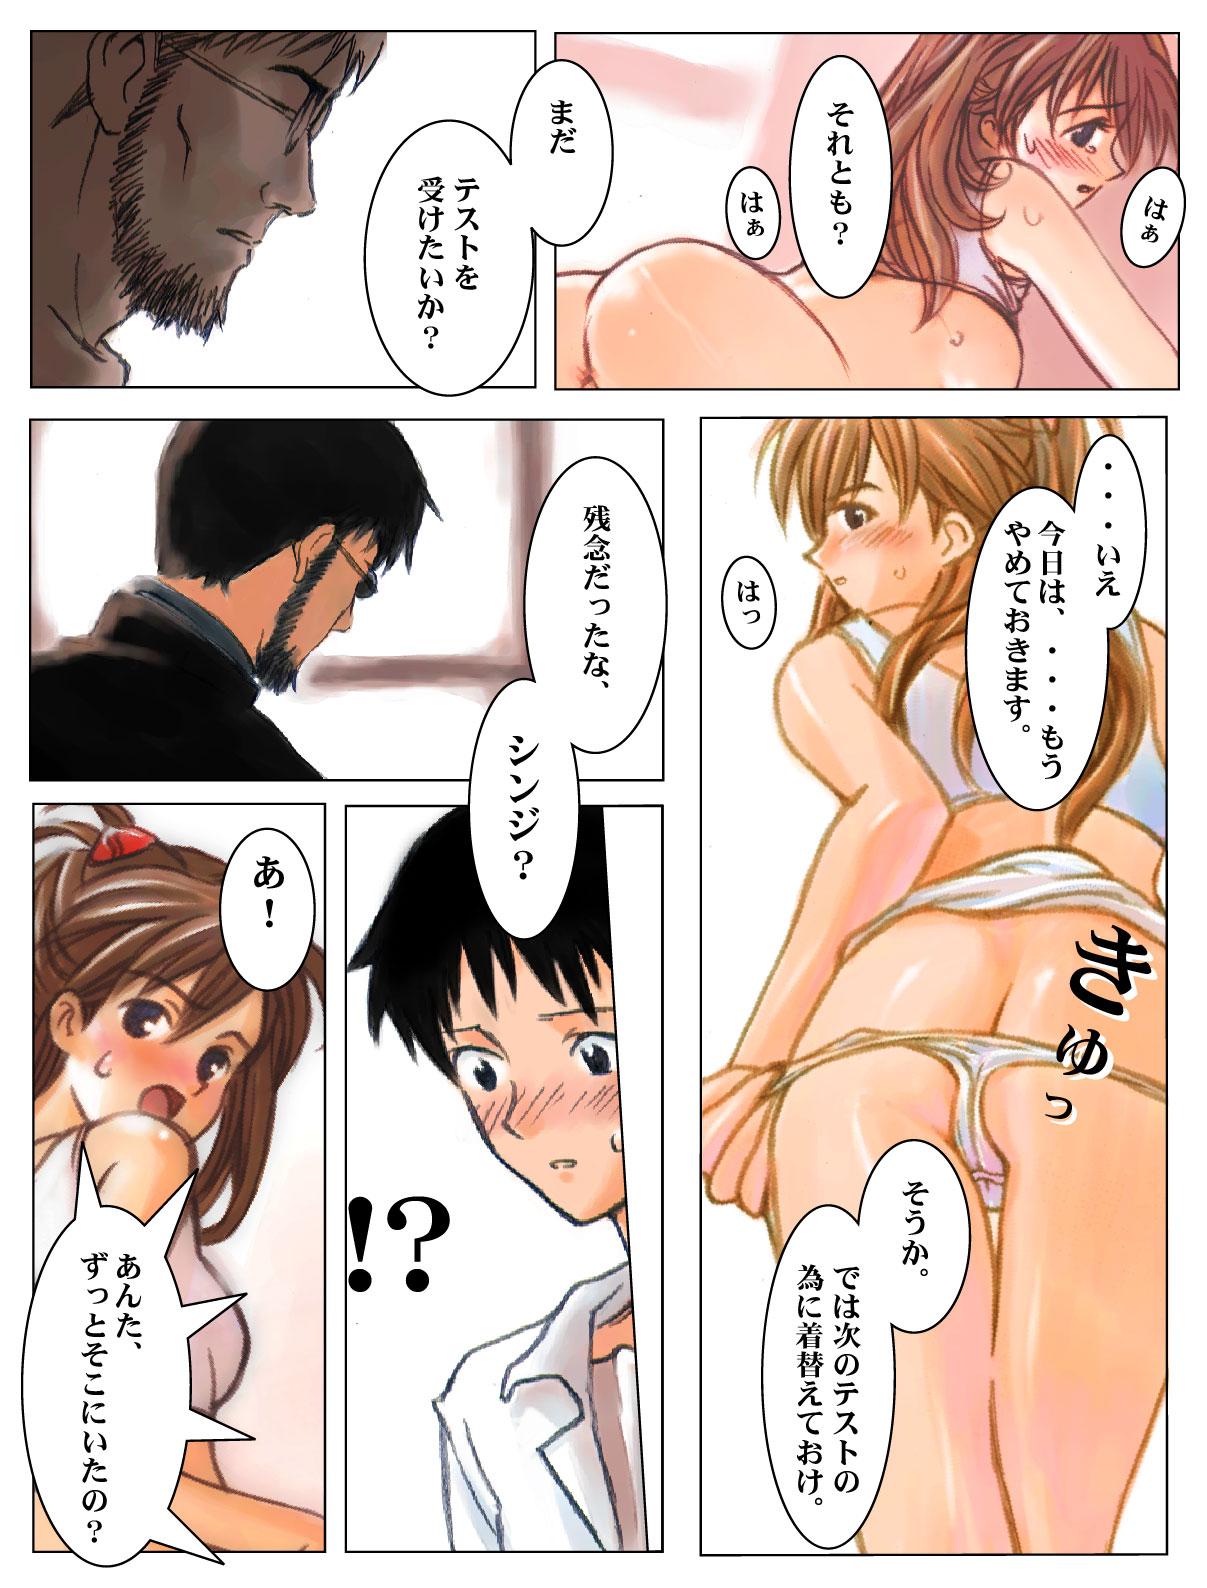 Best Blowjob Rei the Forth - Neon genesis evangelion Chinese - Page 3